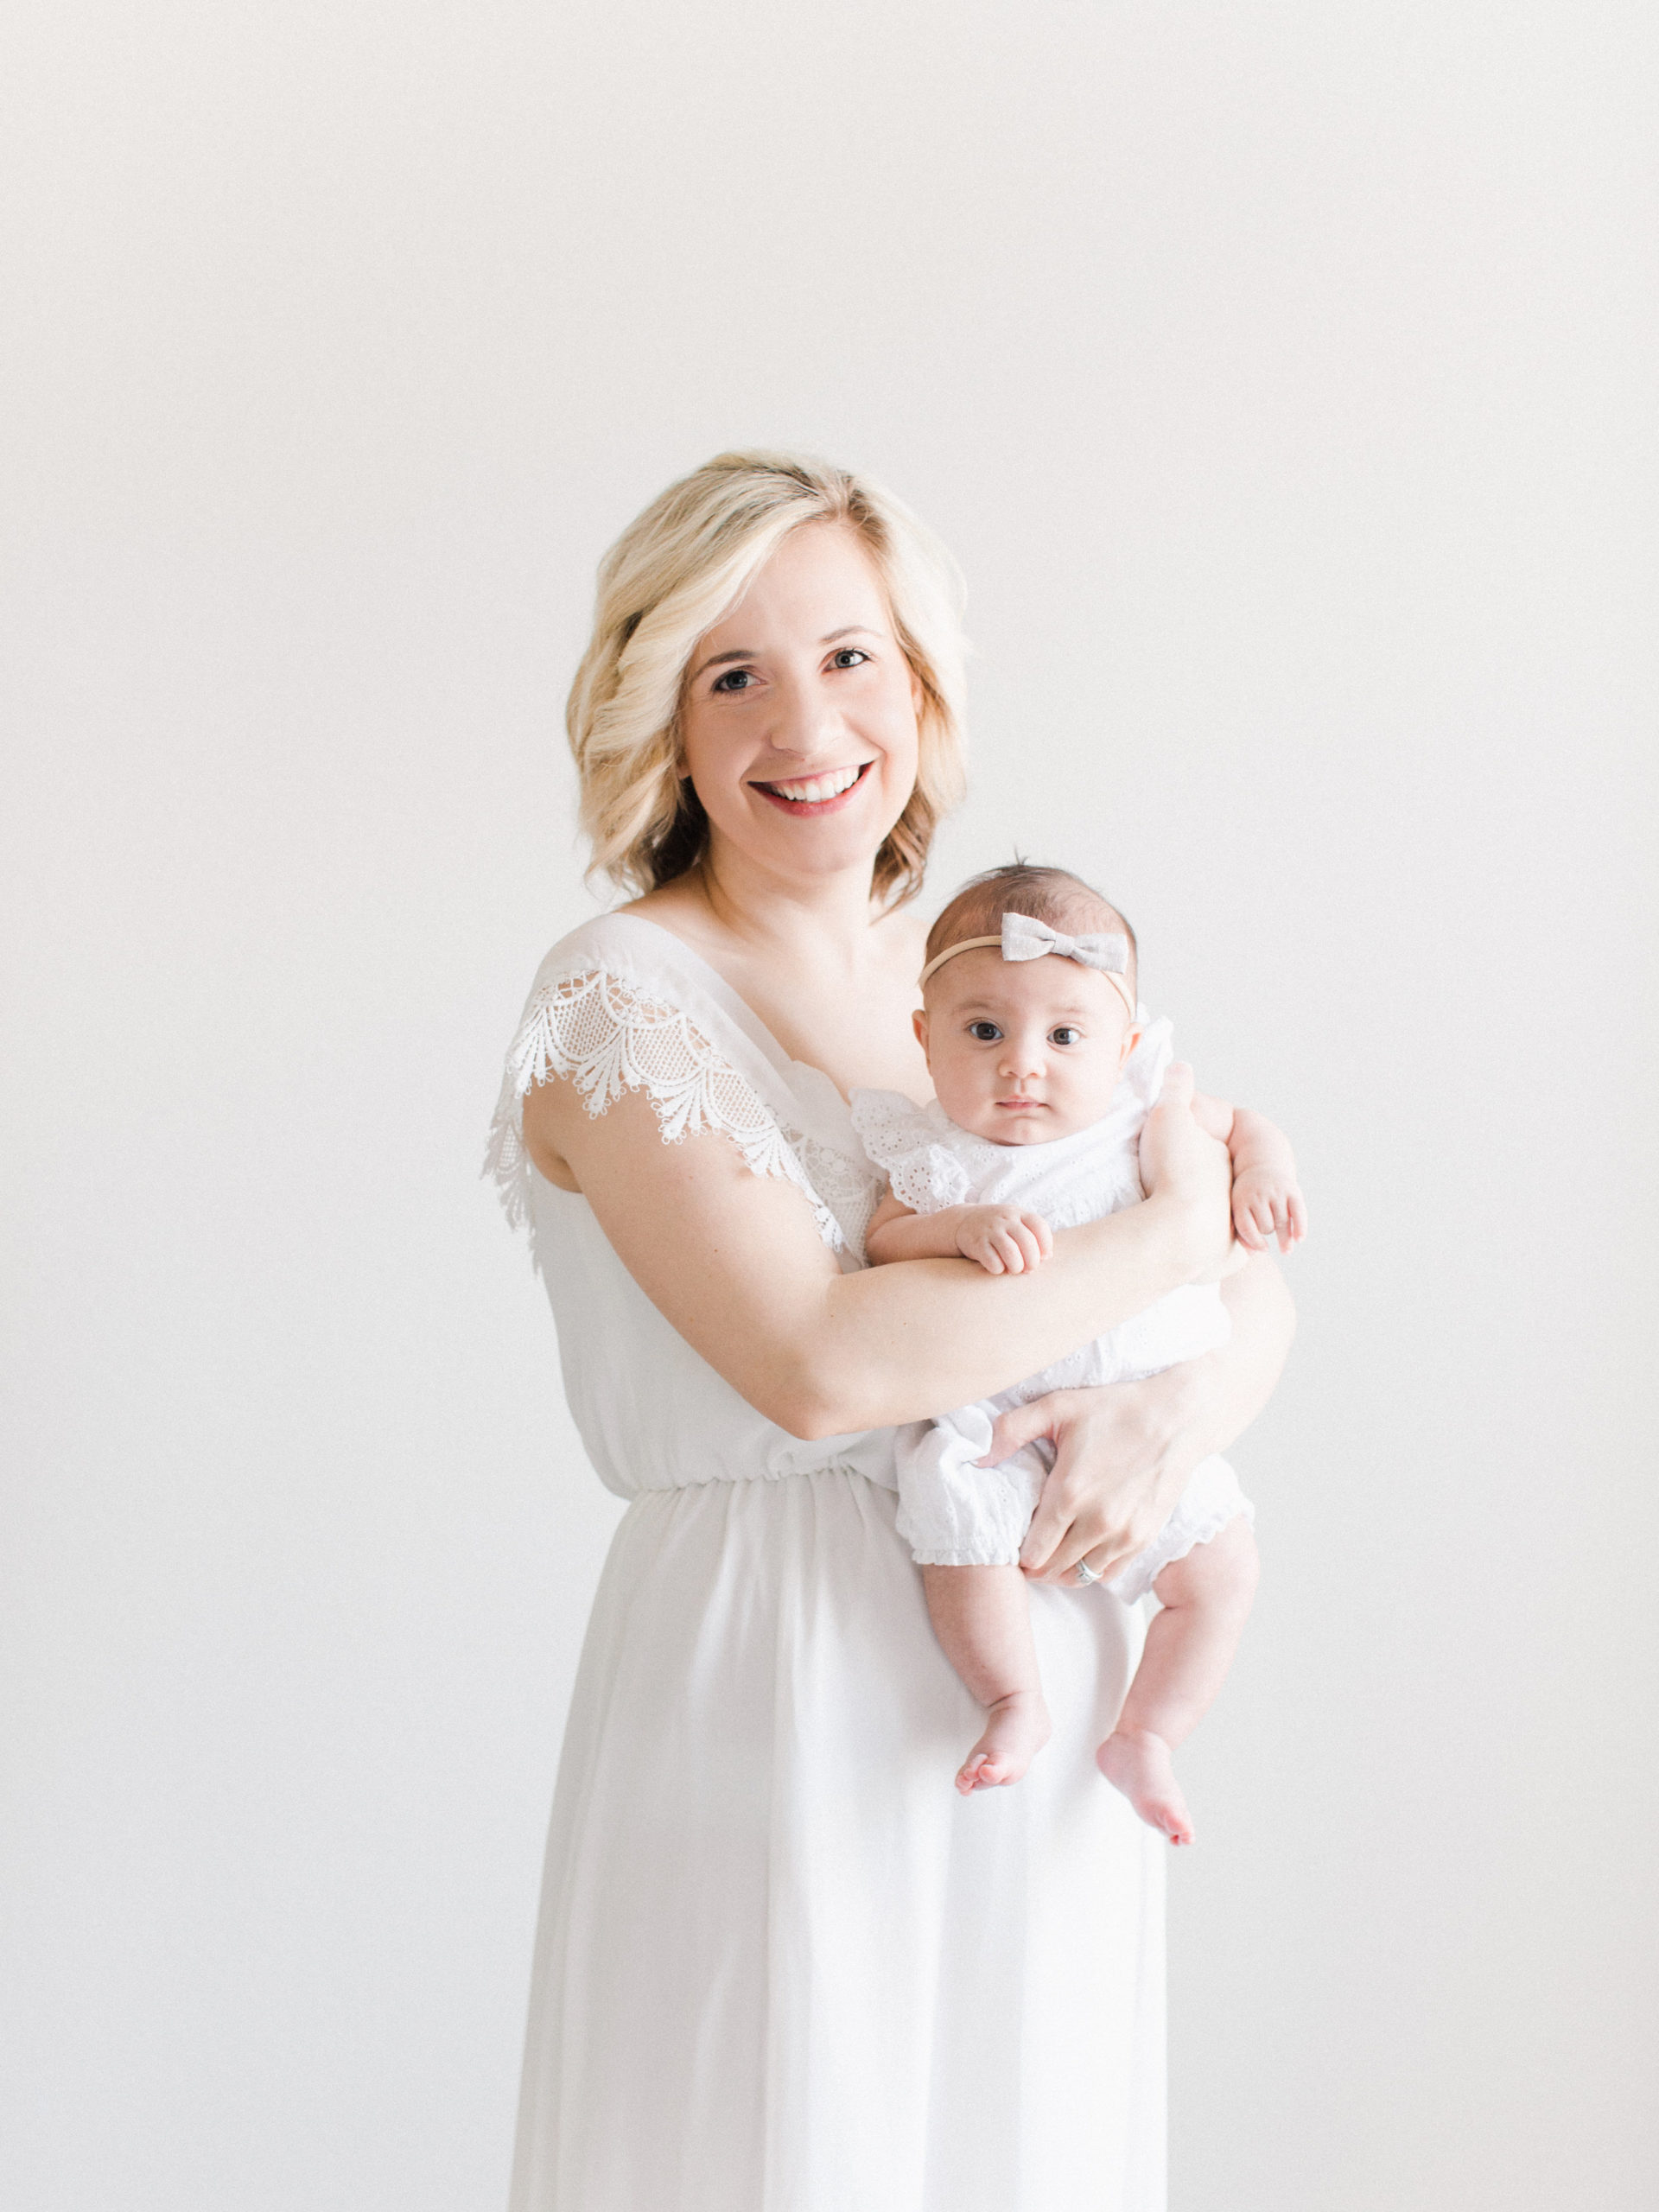 Sweet mother and baby portraits